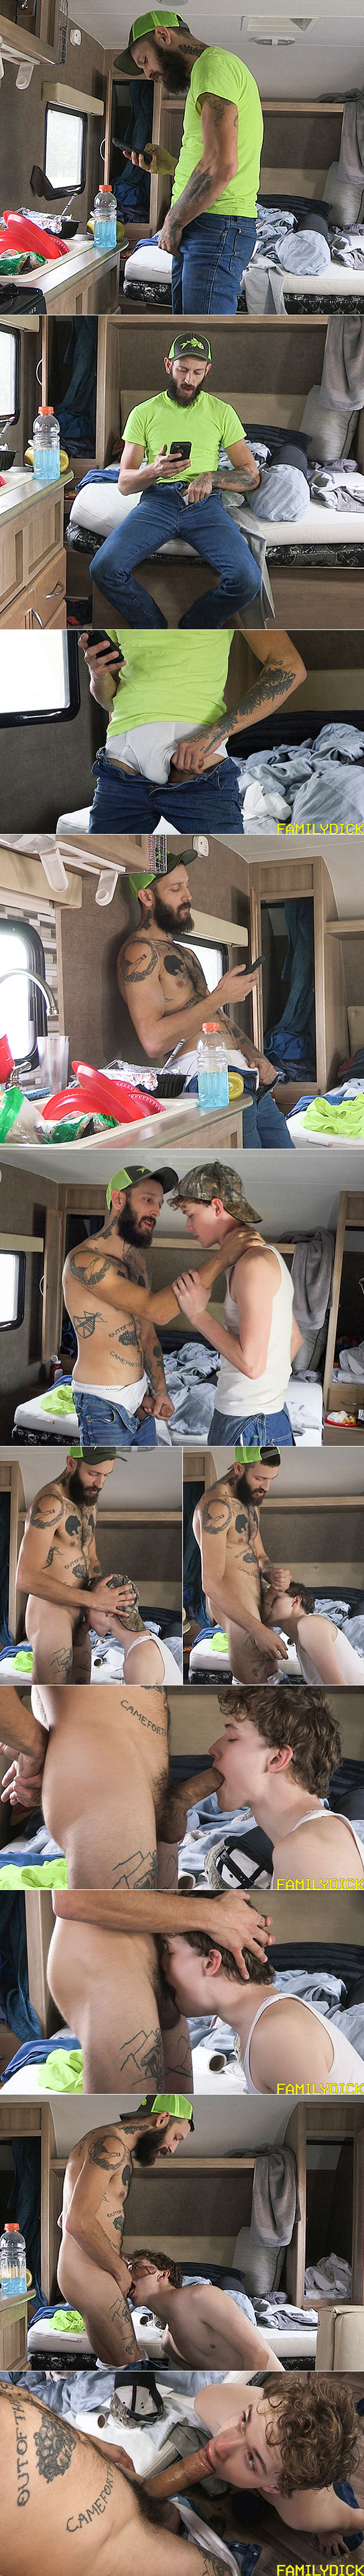 FamilyDick: "Raised in a Trailer – Chapter 1: Single Parent"